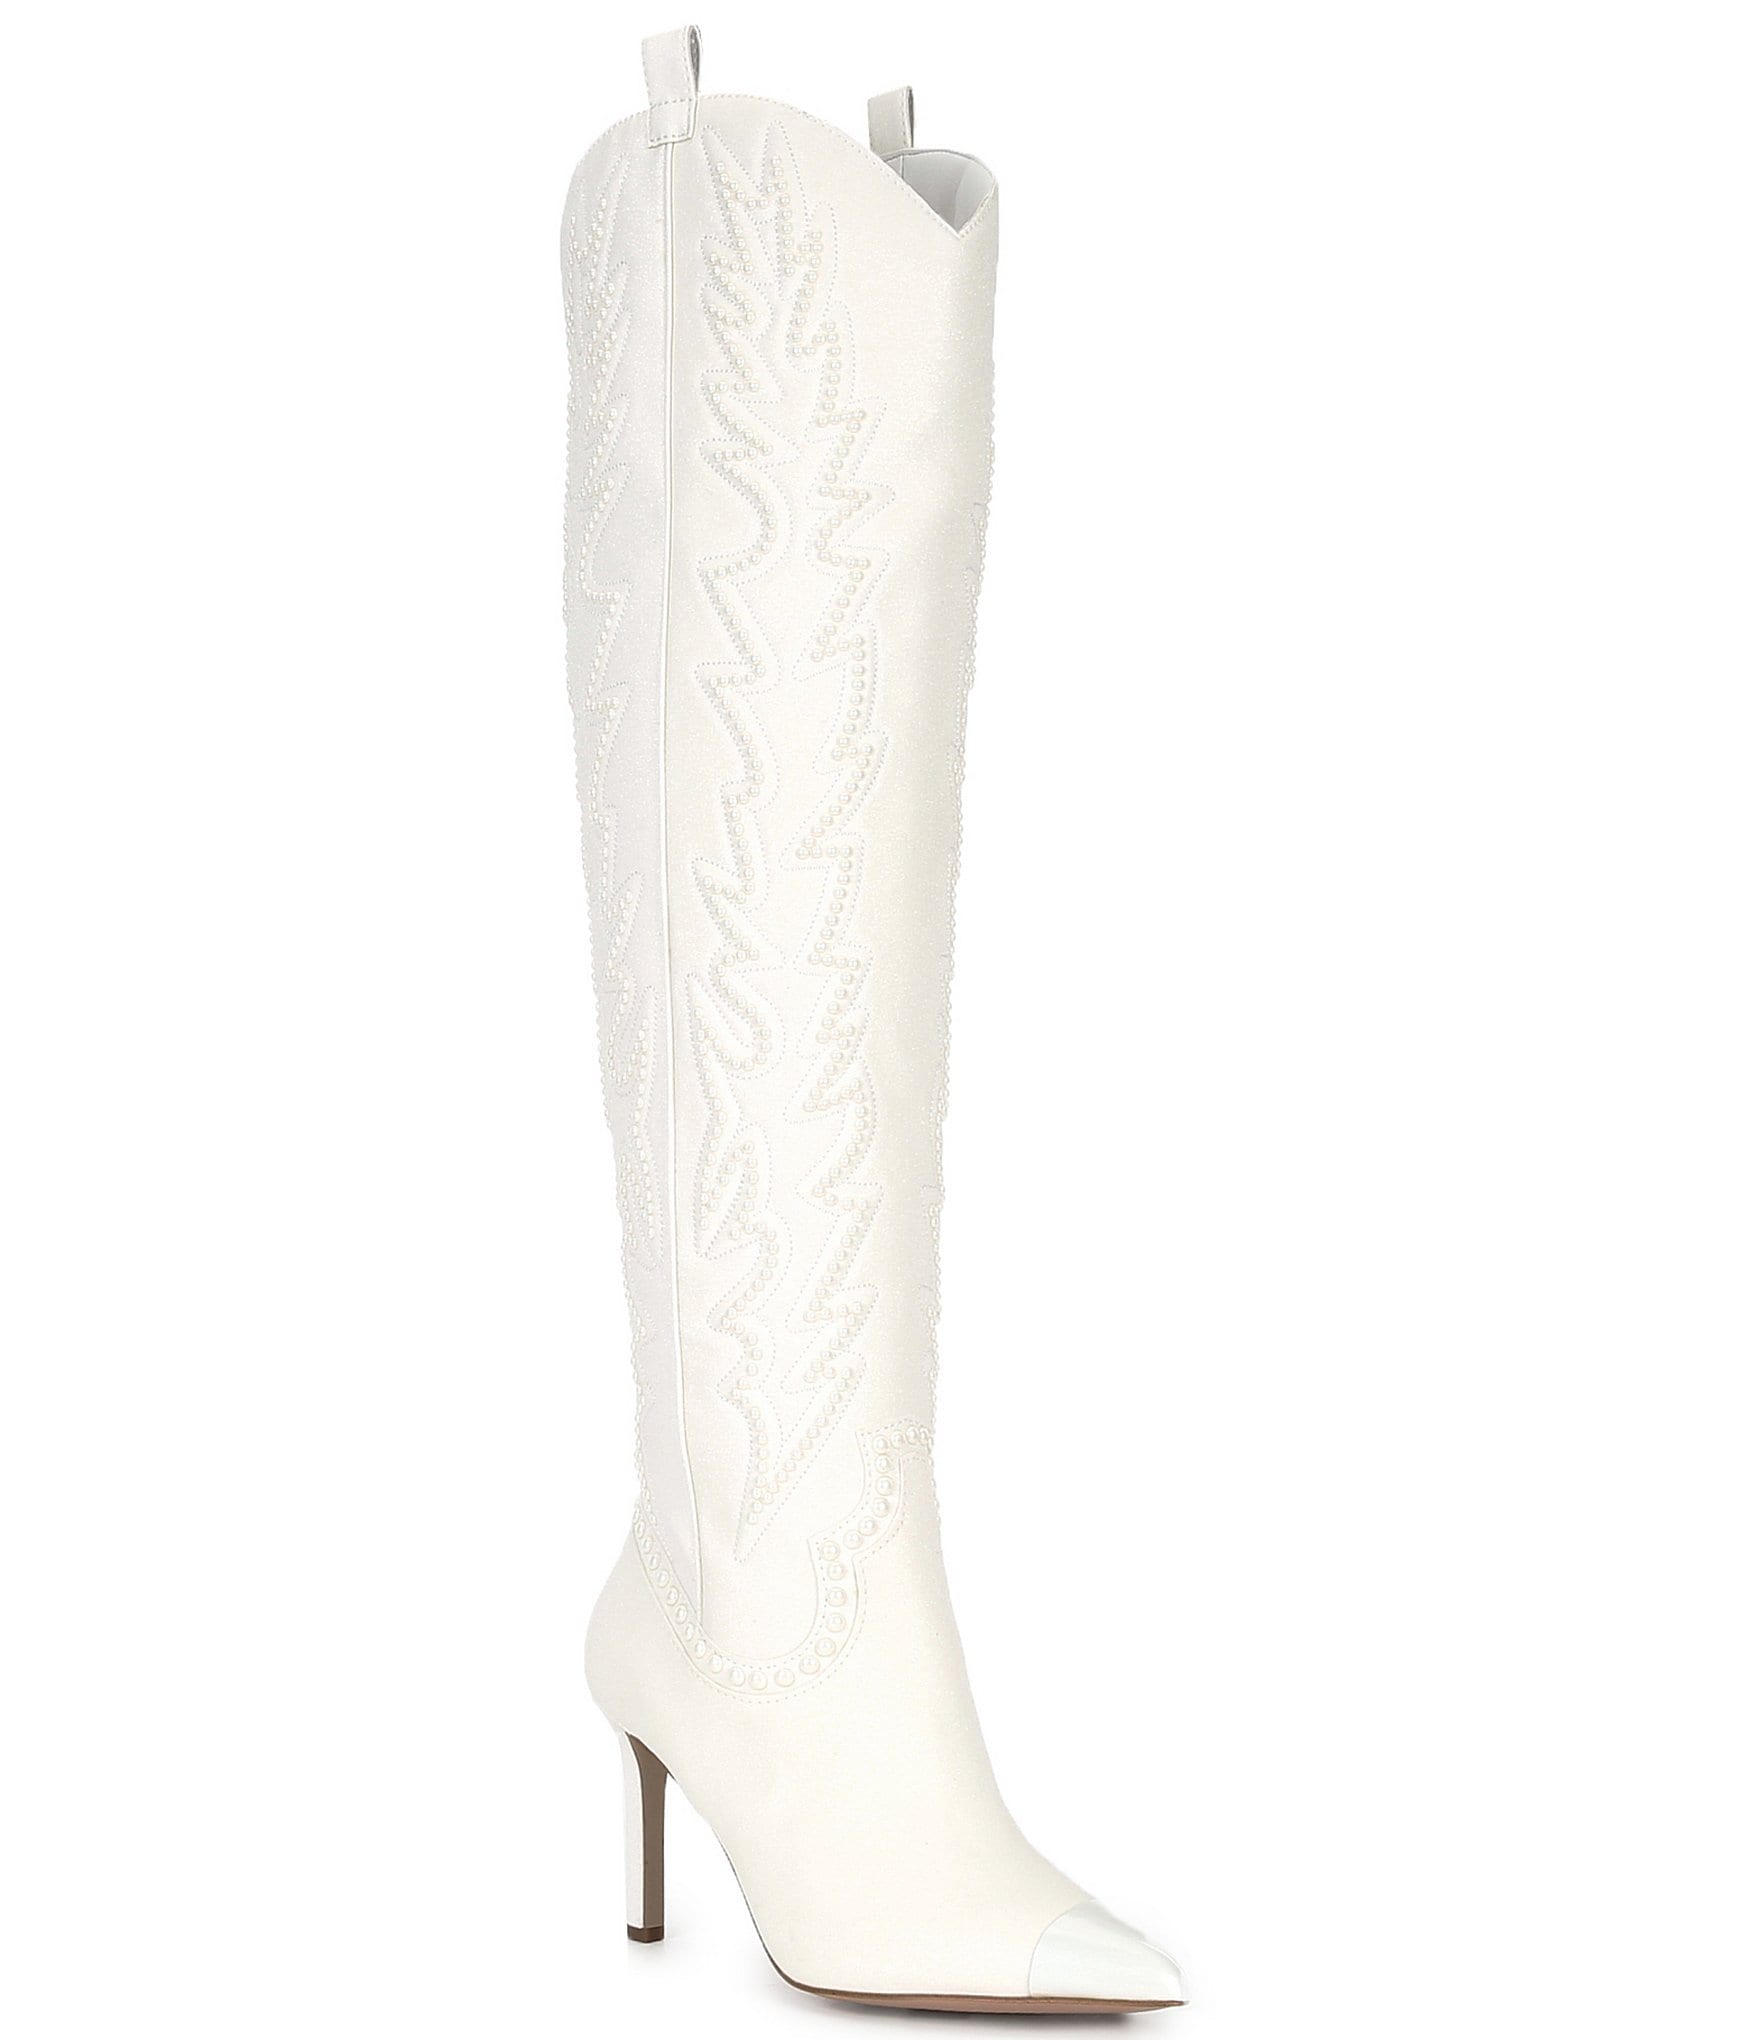 Gianni Bini Bridal Collection KaterinaTwo Pearl Over-the-Knee Western ...